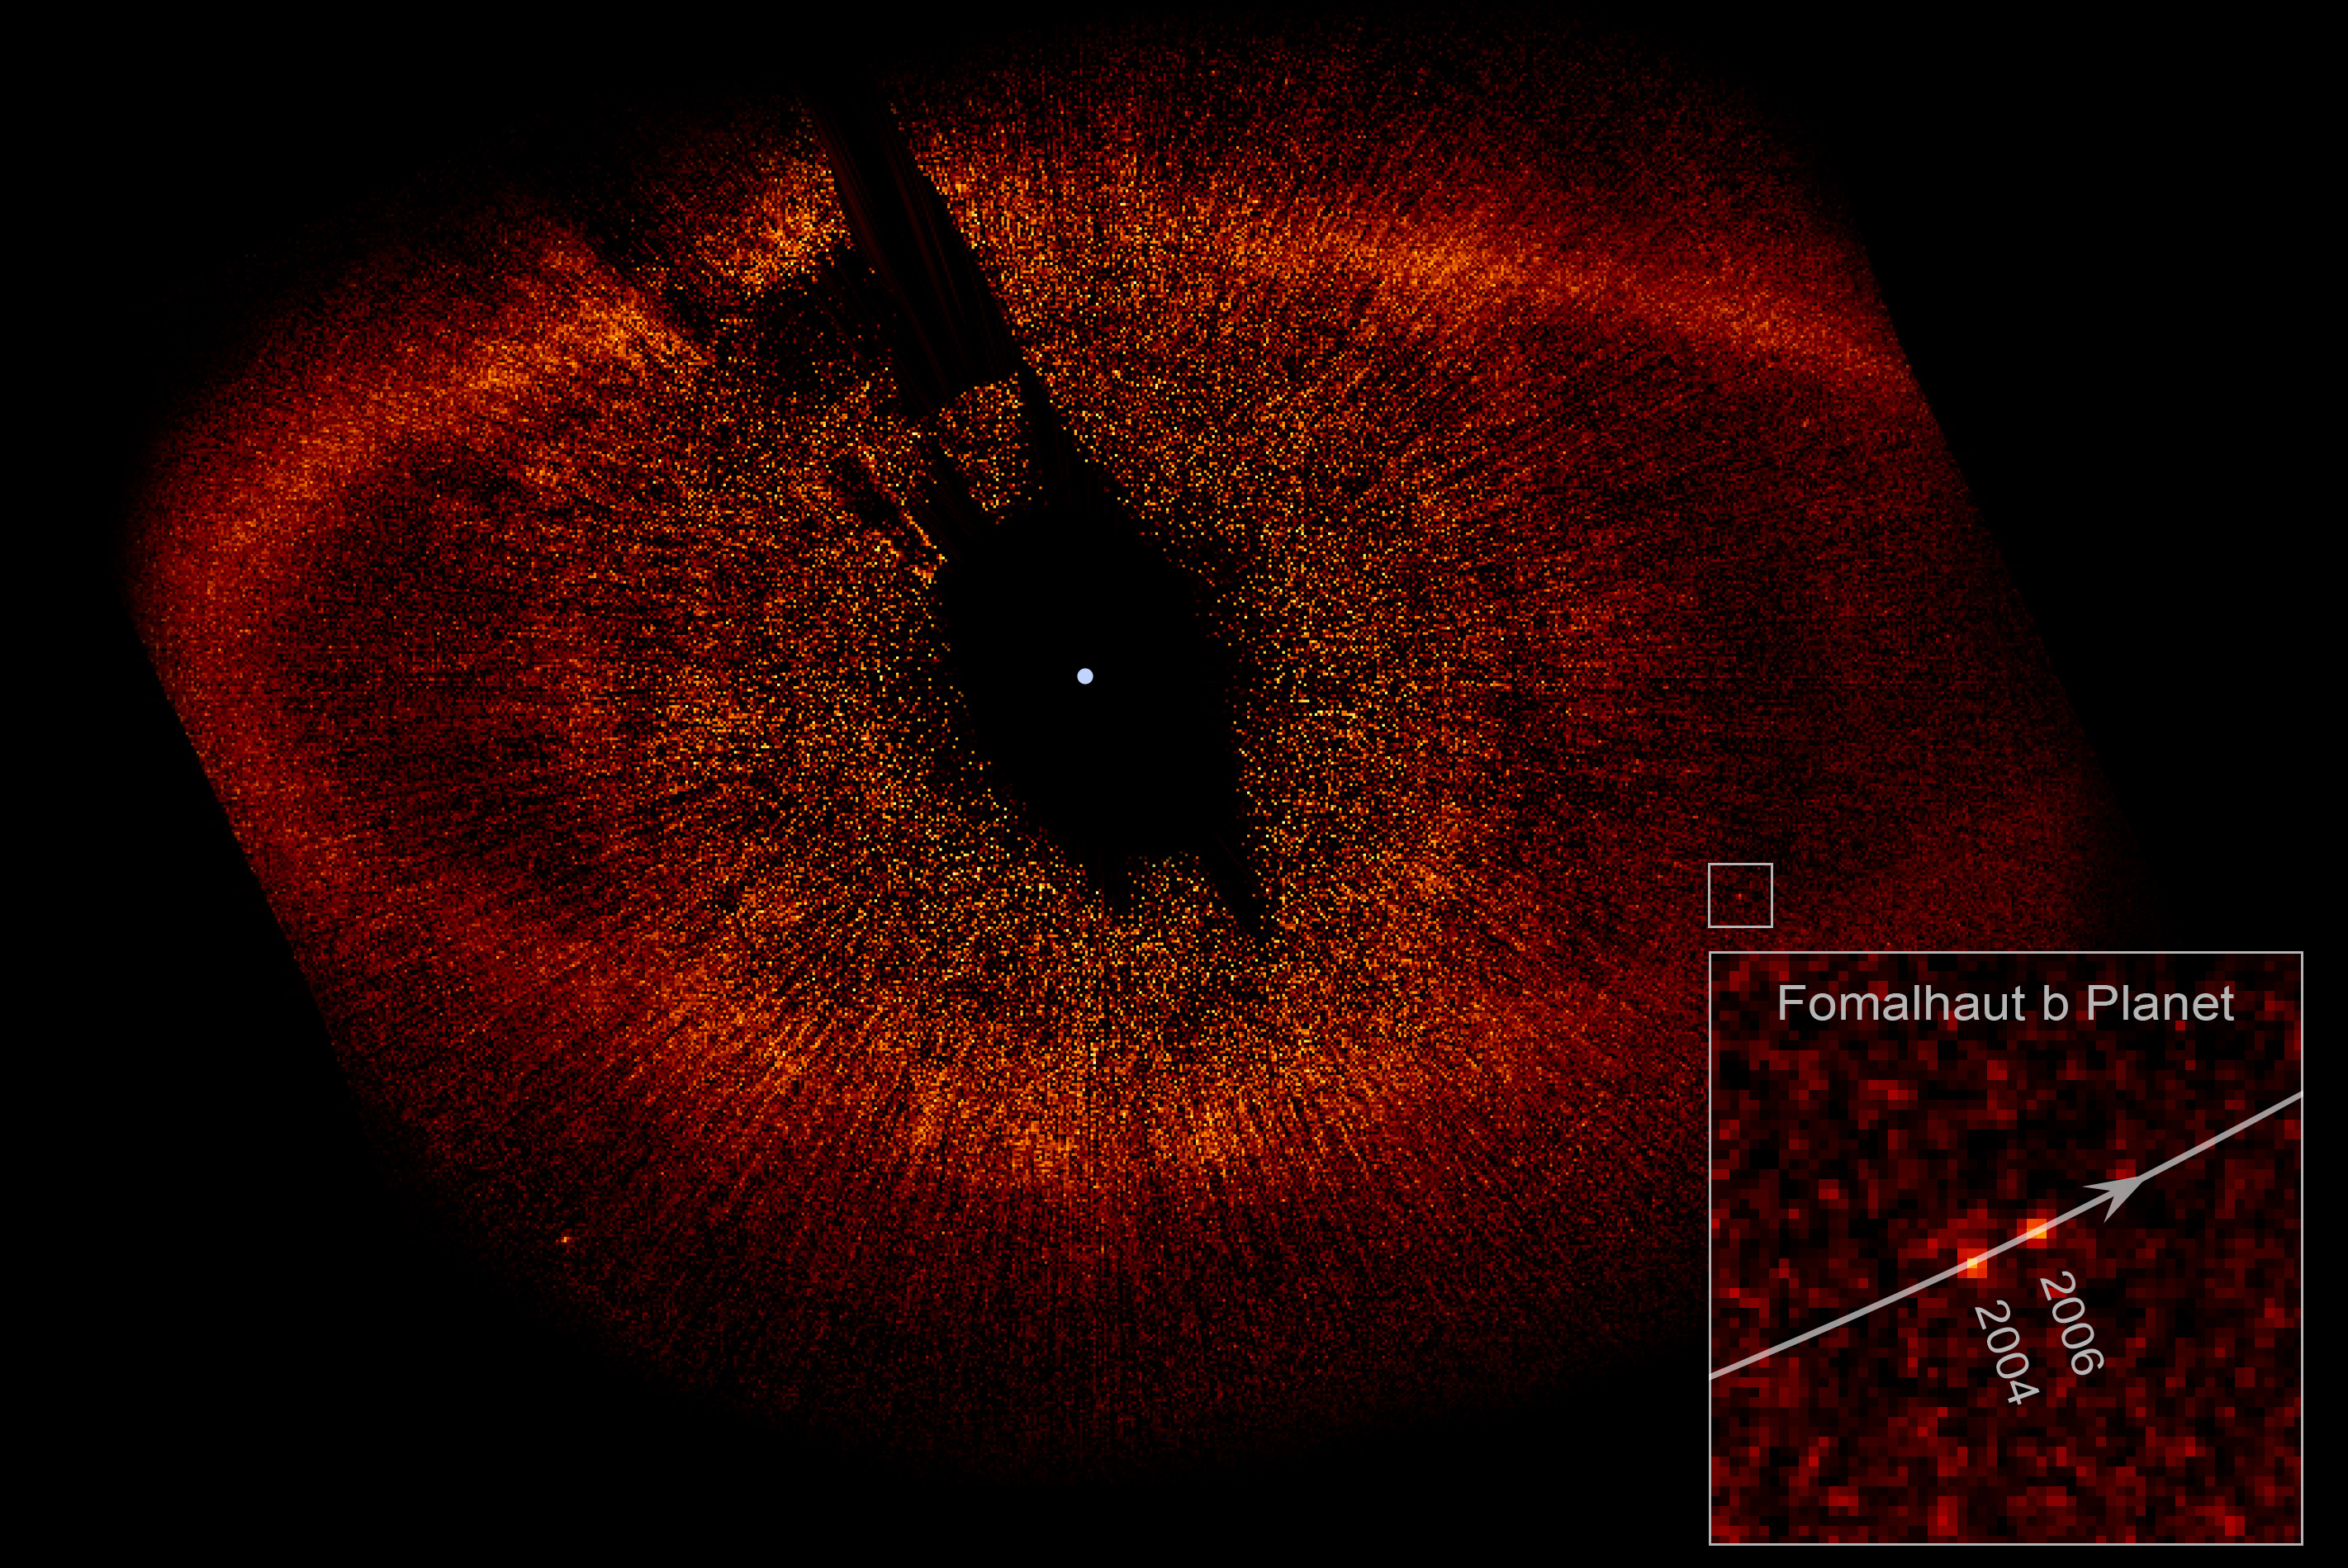 Fomalhaut with Disk Ring and extrasolar planet b